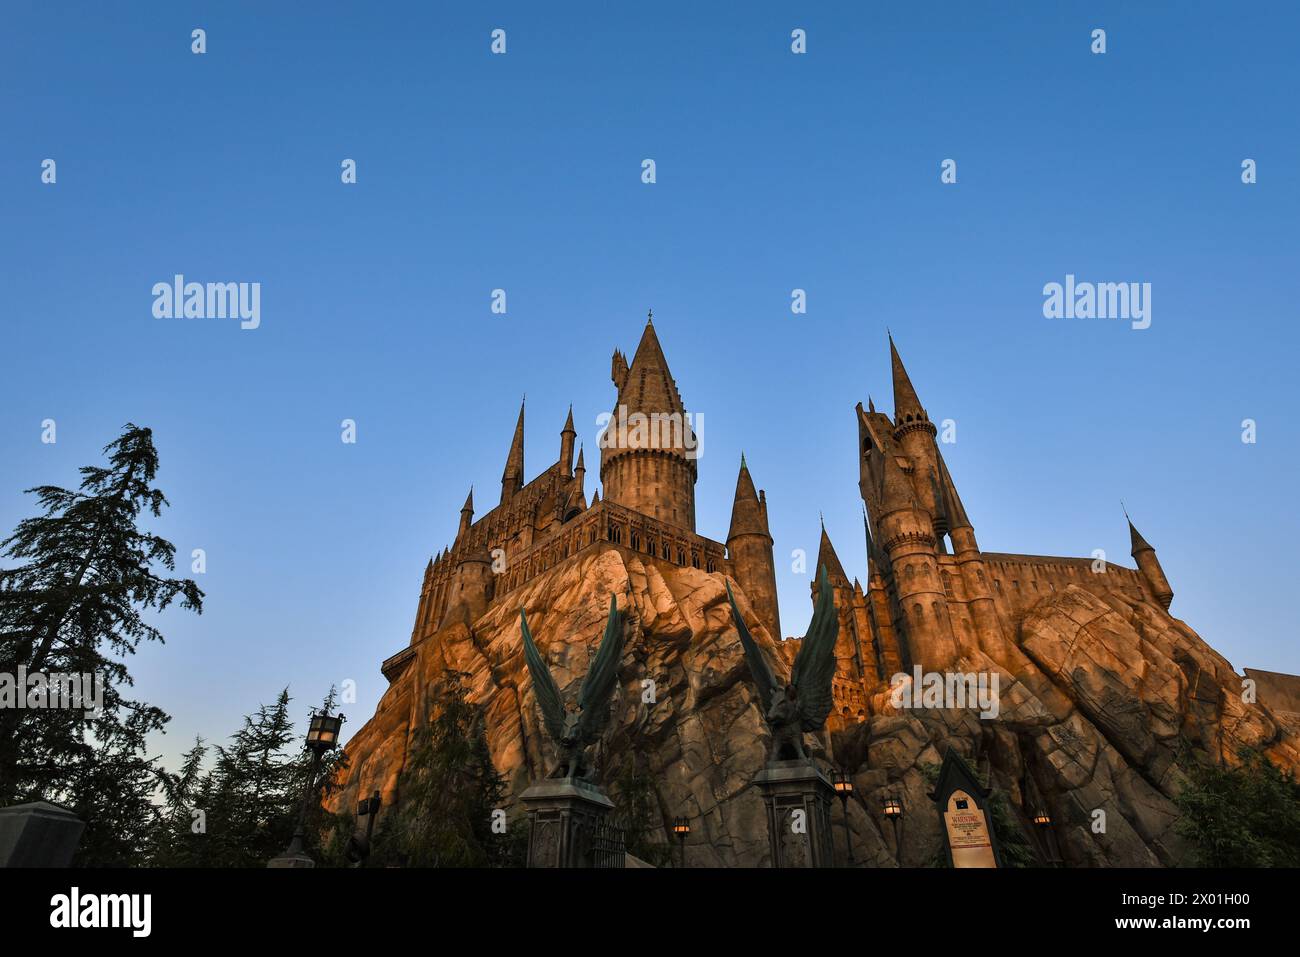 Sunset over Hogwarts Castle at the Wizarding World of Harry Potter in Universal Studios Hollywood - Los Angeles, California Stock Photo